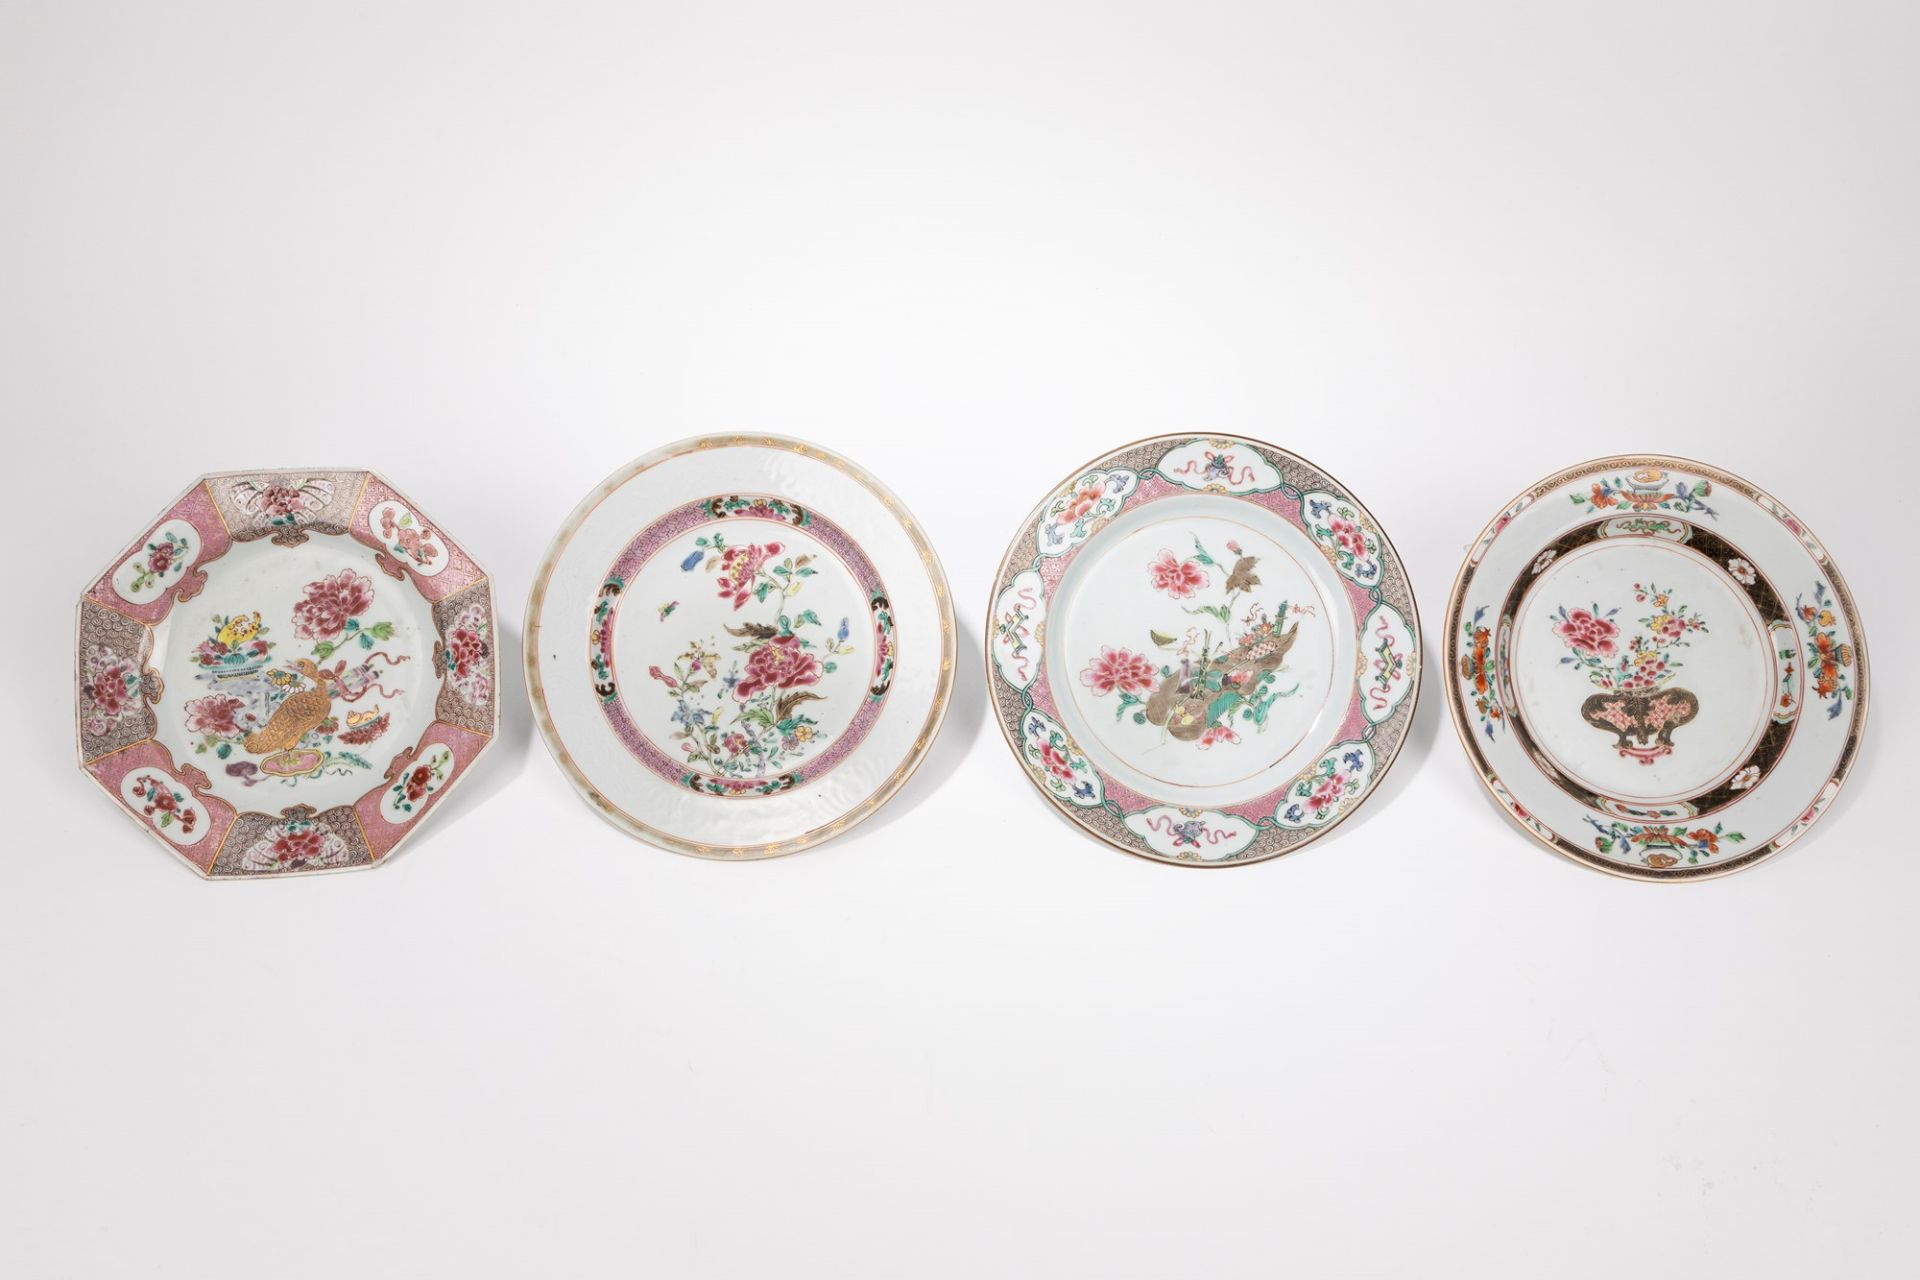 FOUR FAMILLE ROSE PORCELAIN DISHES, China, Qing dynasty, 18th century